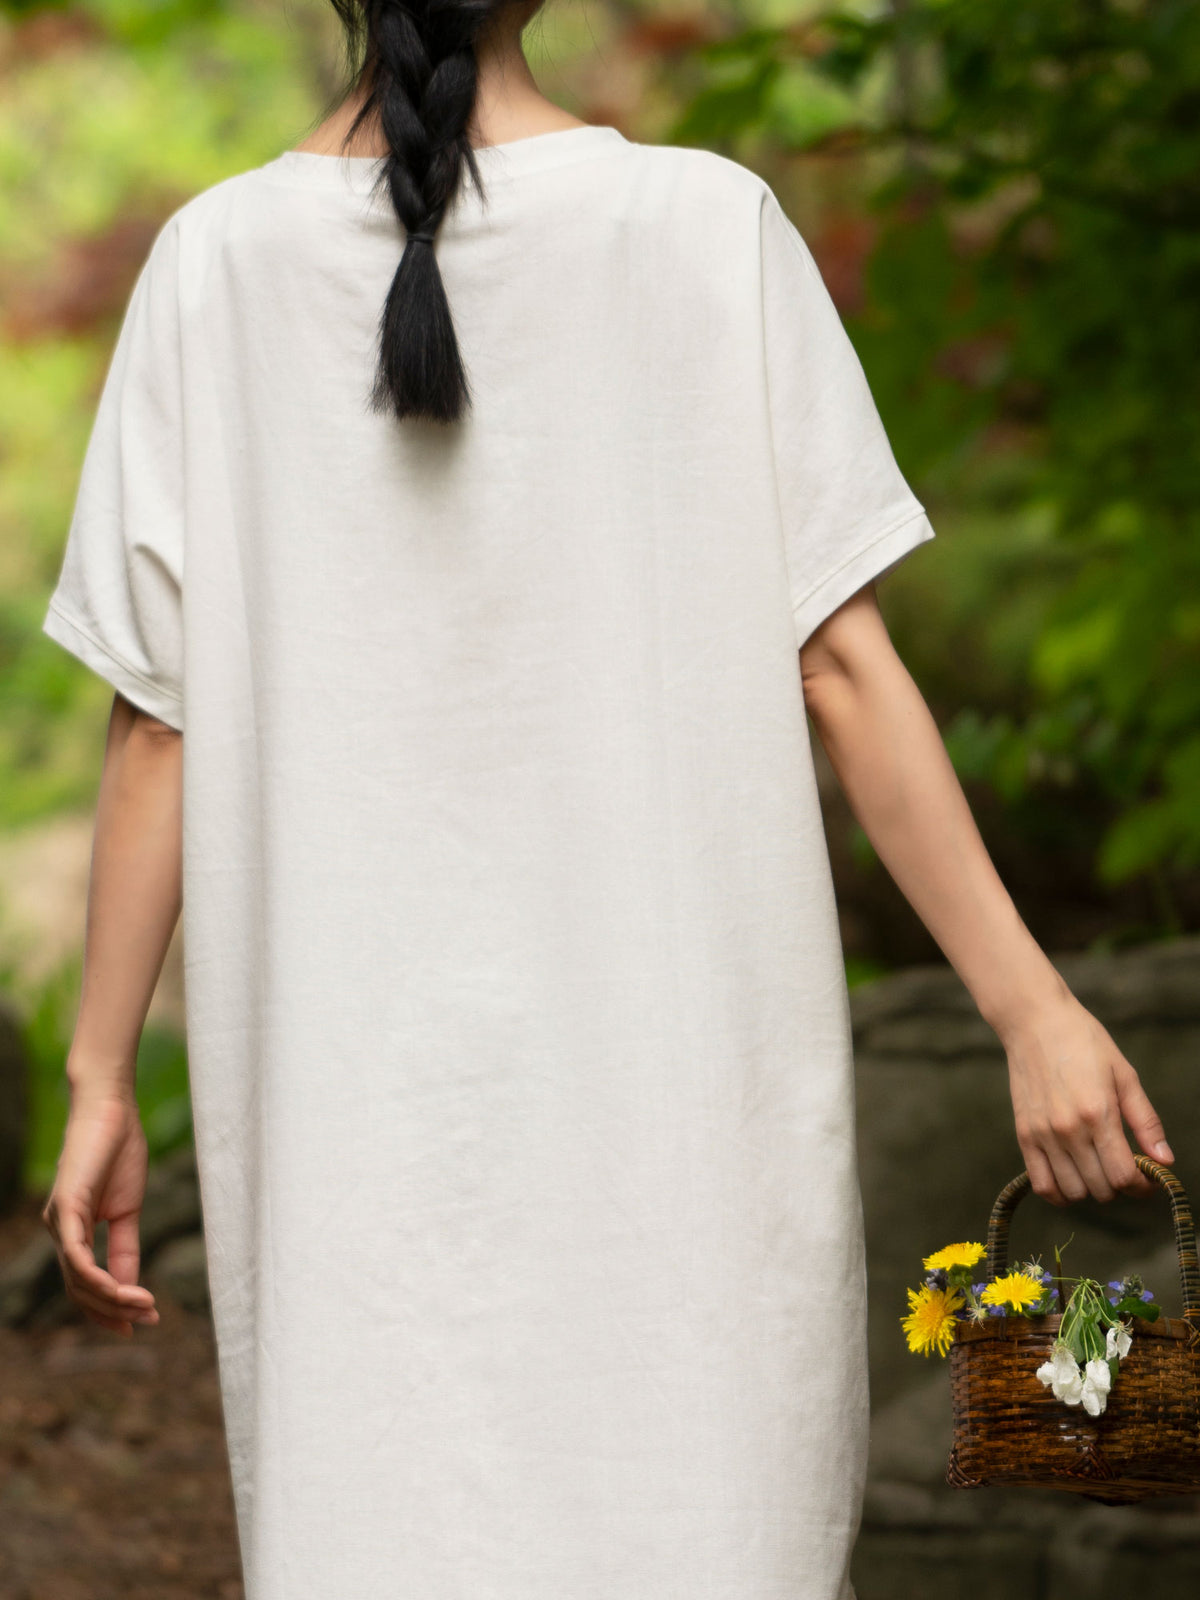 Creamy White Essential T-Shirt Dress - Magnifissance Store